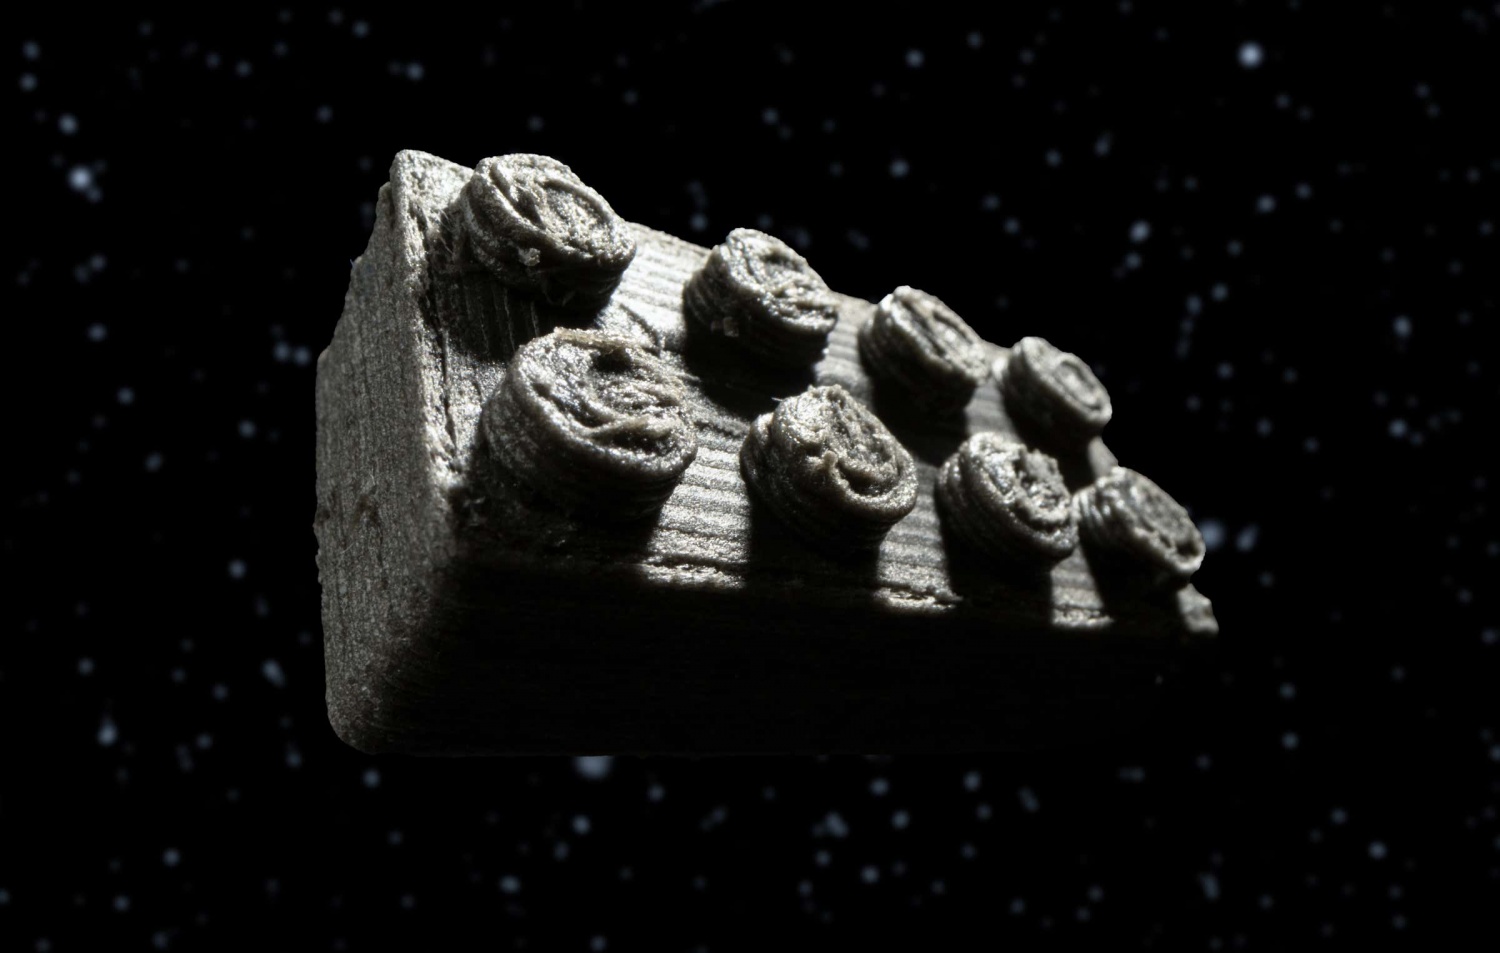 ESA Scientists Use Meteorite Dust to Create 3D-Printed LEGO Bricks to Help Build Astronaut Shelters on Moon